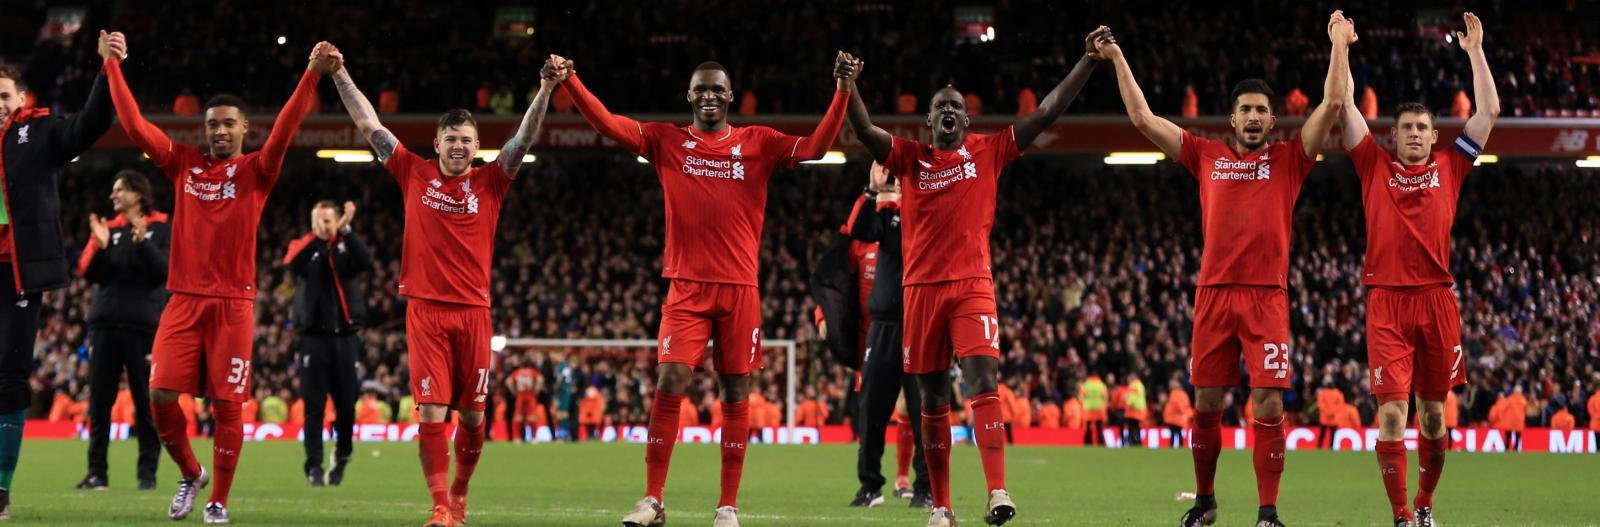 Round-Up: Capital One Cup – Liverpool one step closer to record ninth League Cup